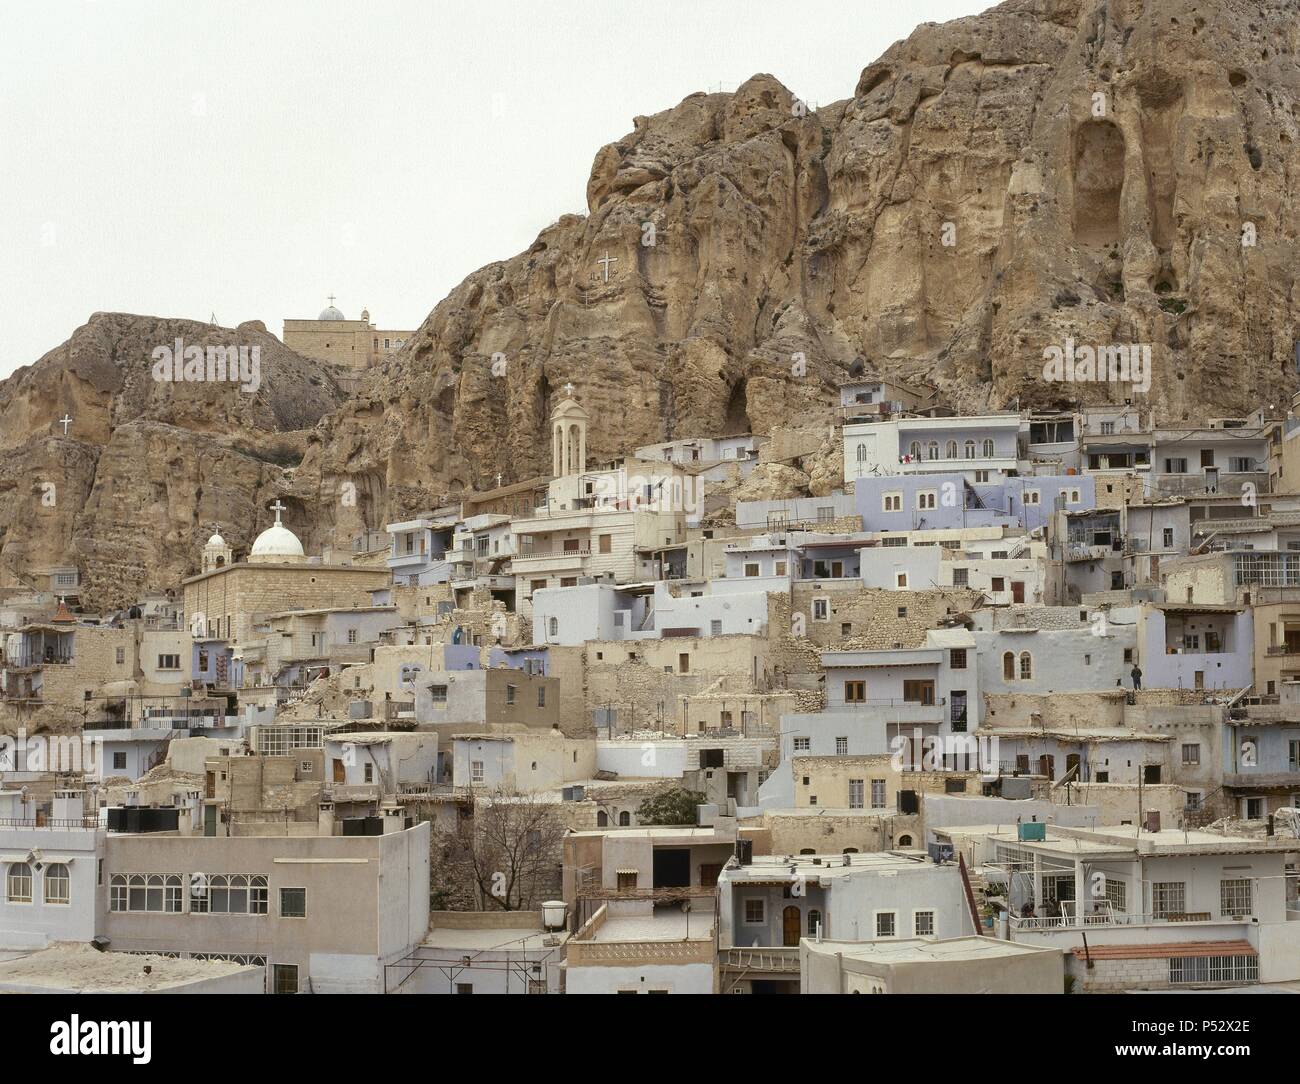 Syria. Ma«loula. Town built into the rugged mountainside. Village where Western Aramaic is still spoken. Near East. Photo before Syrian Civil War. Stock Photo